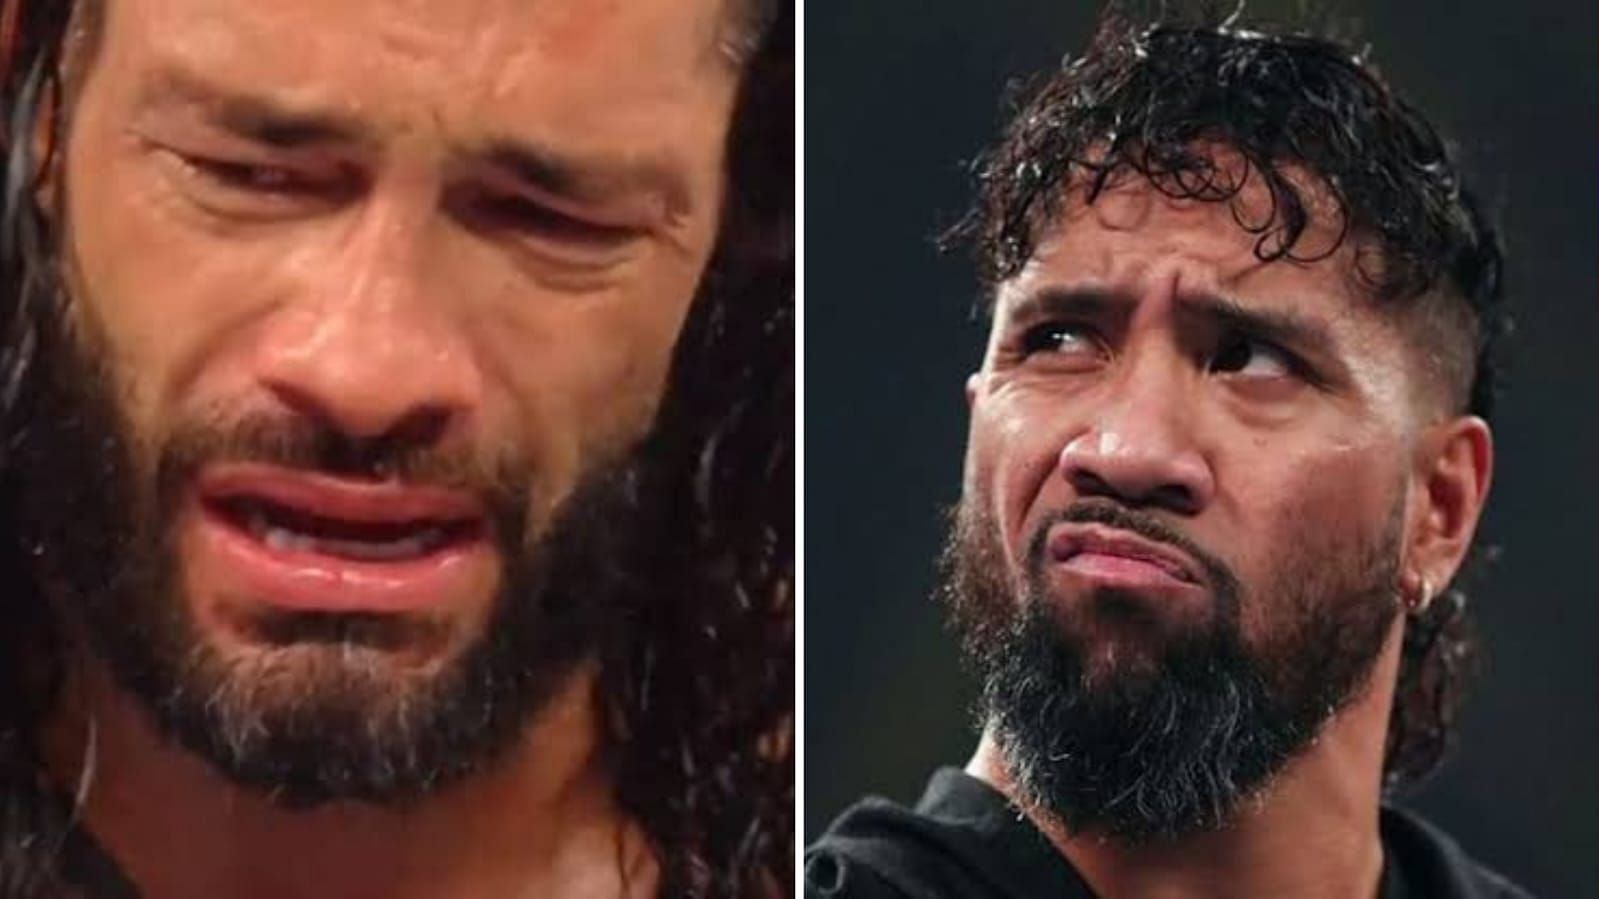 Roman Reigns and Jey Uso are set to collide at SummerSlam 2023.